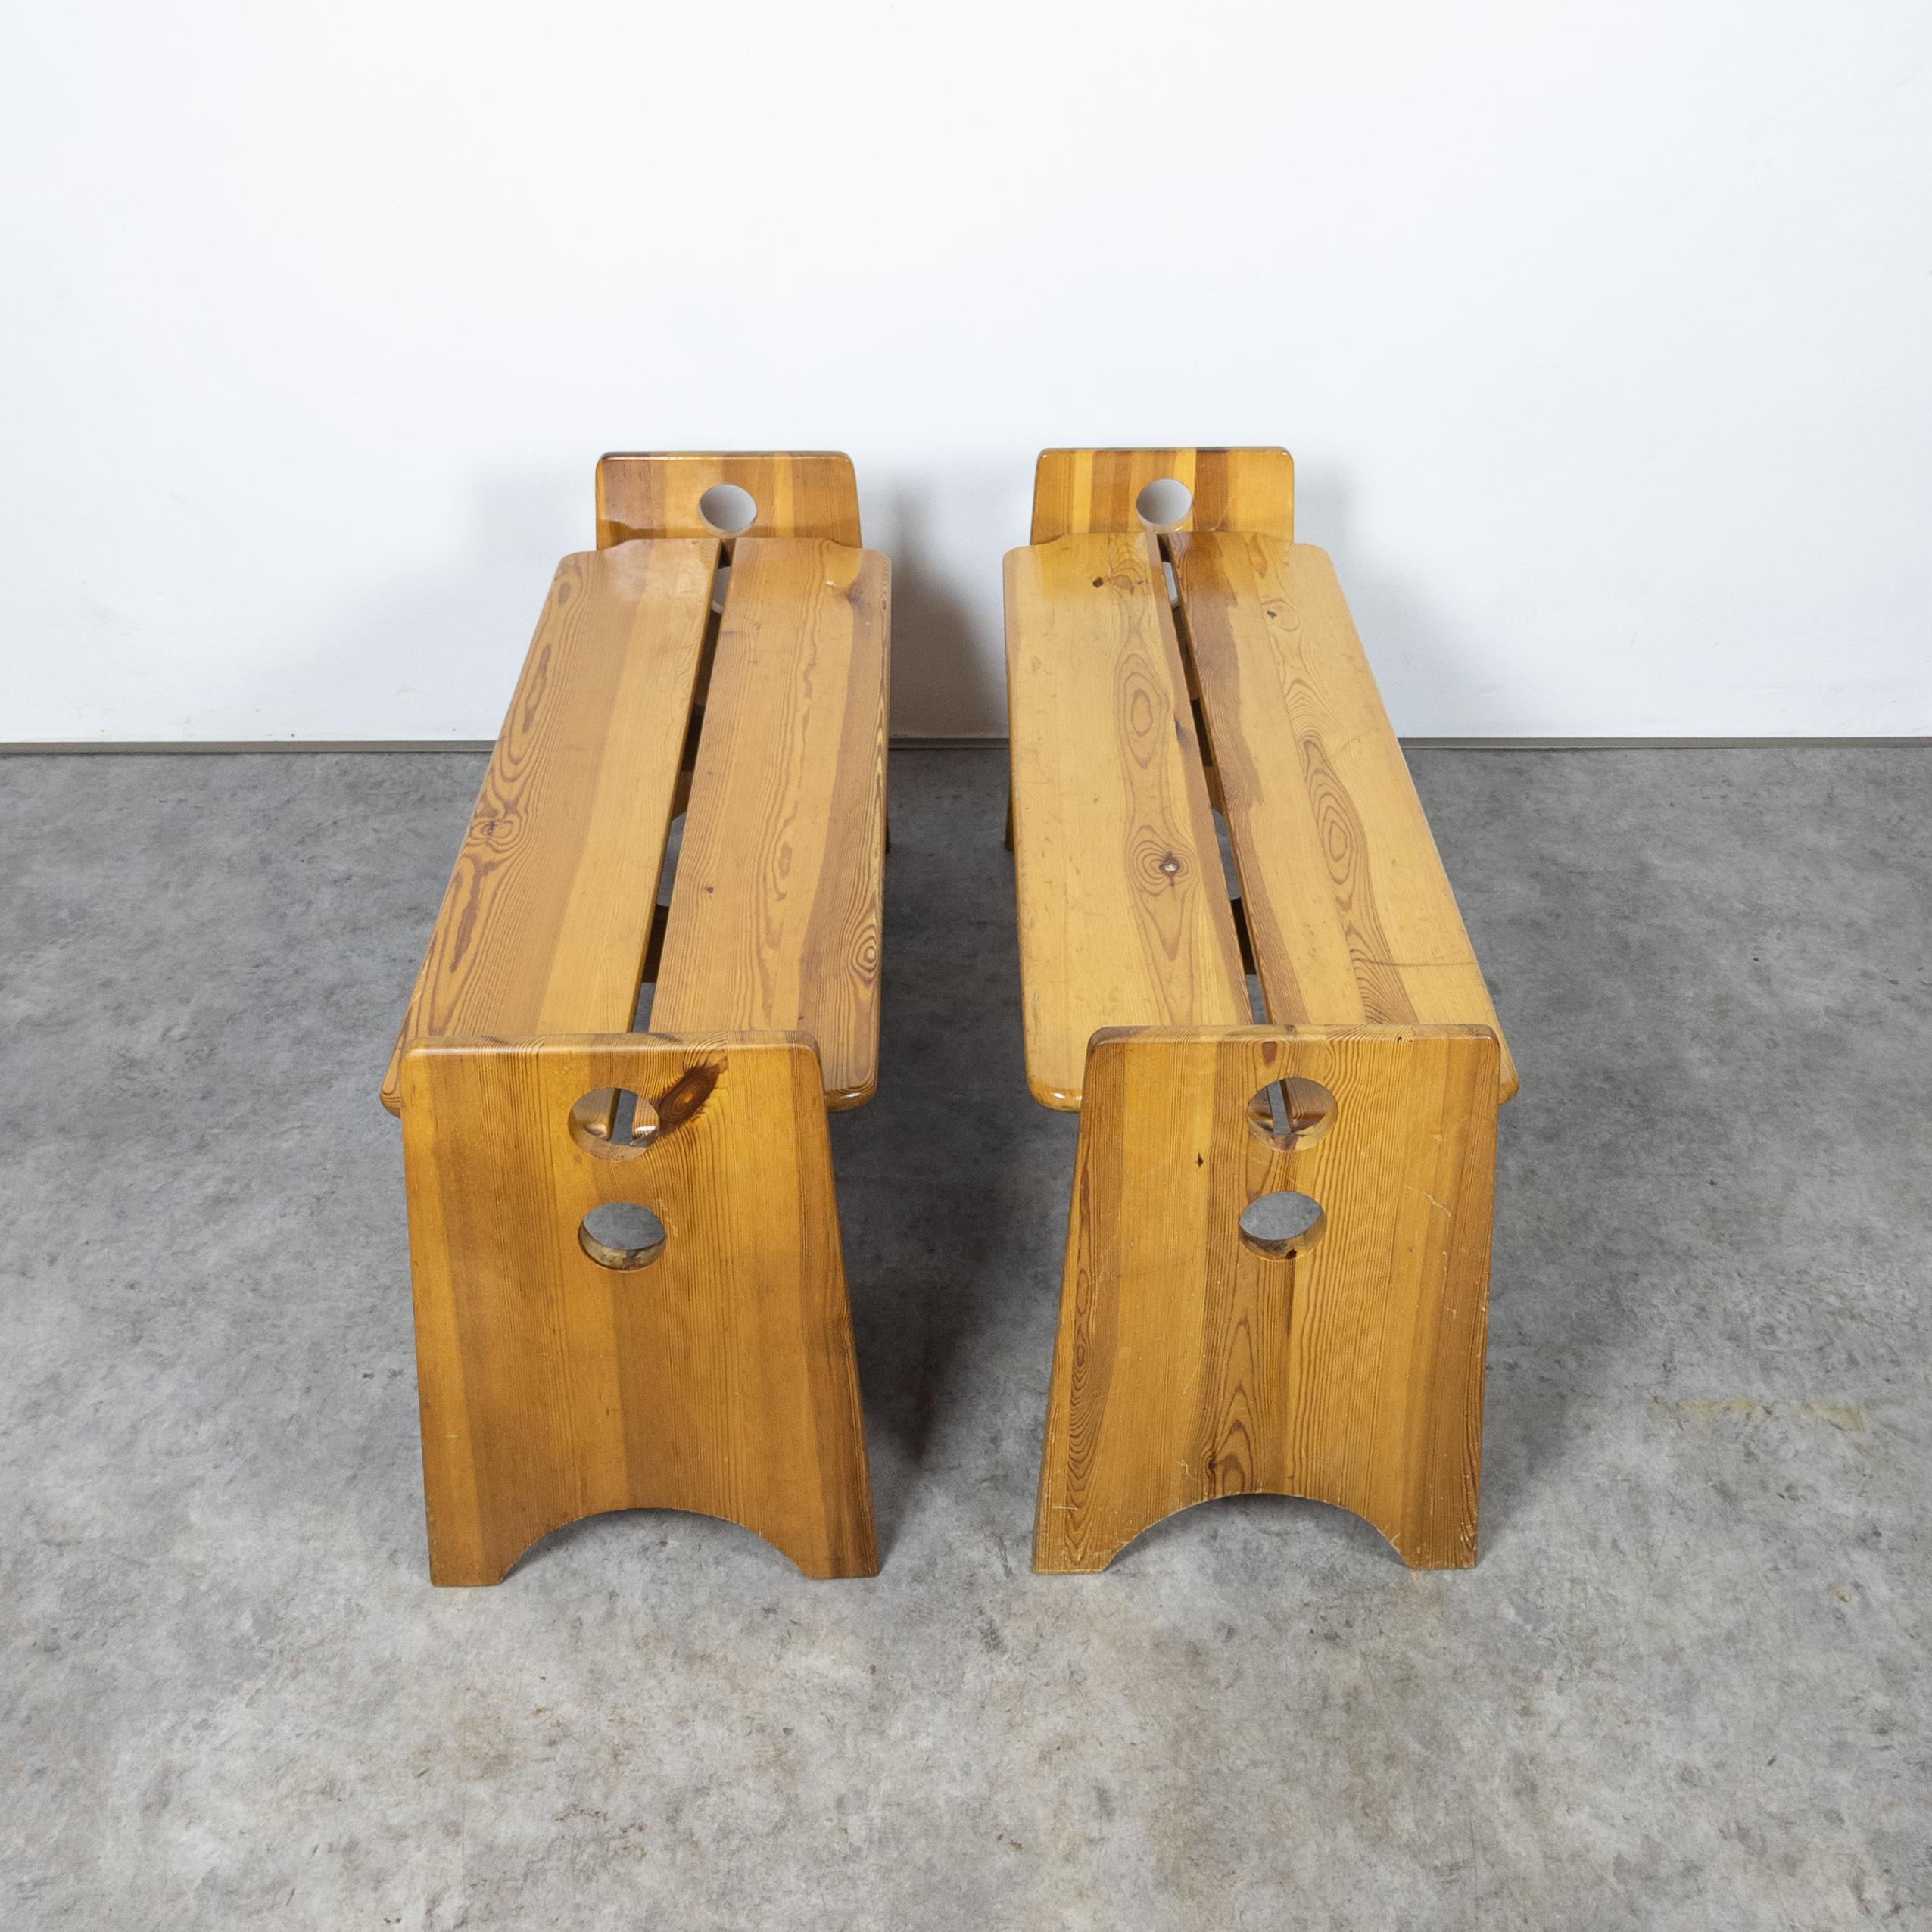 Pair of solid pine sculptural benches by Gilbert Marklund for Furusnickarn AB  1